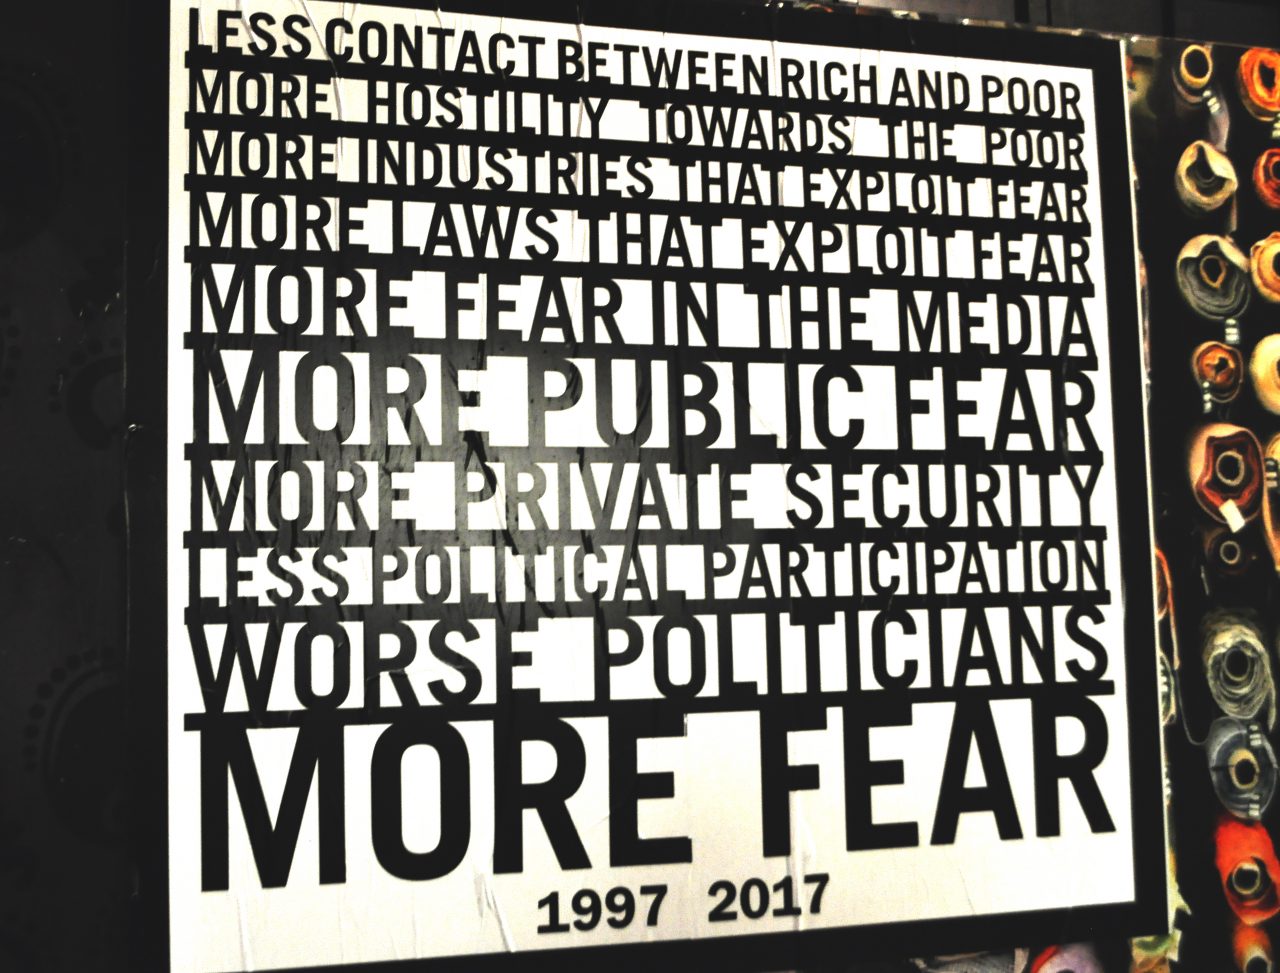 More fear